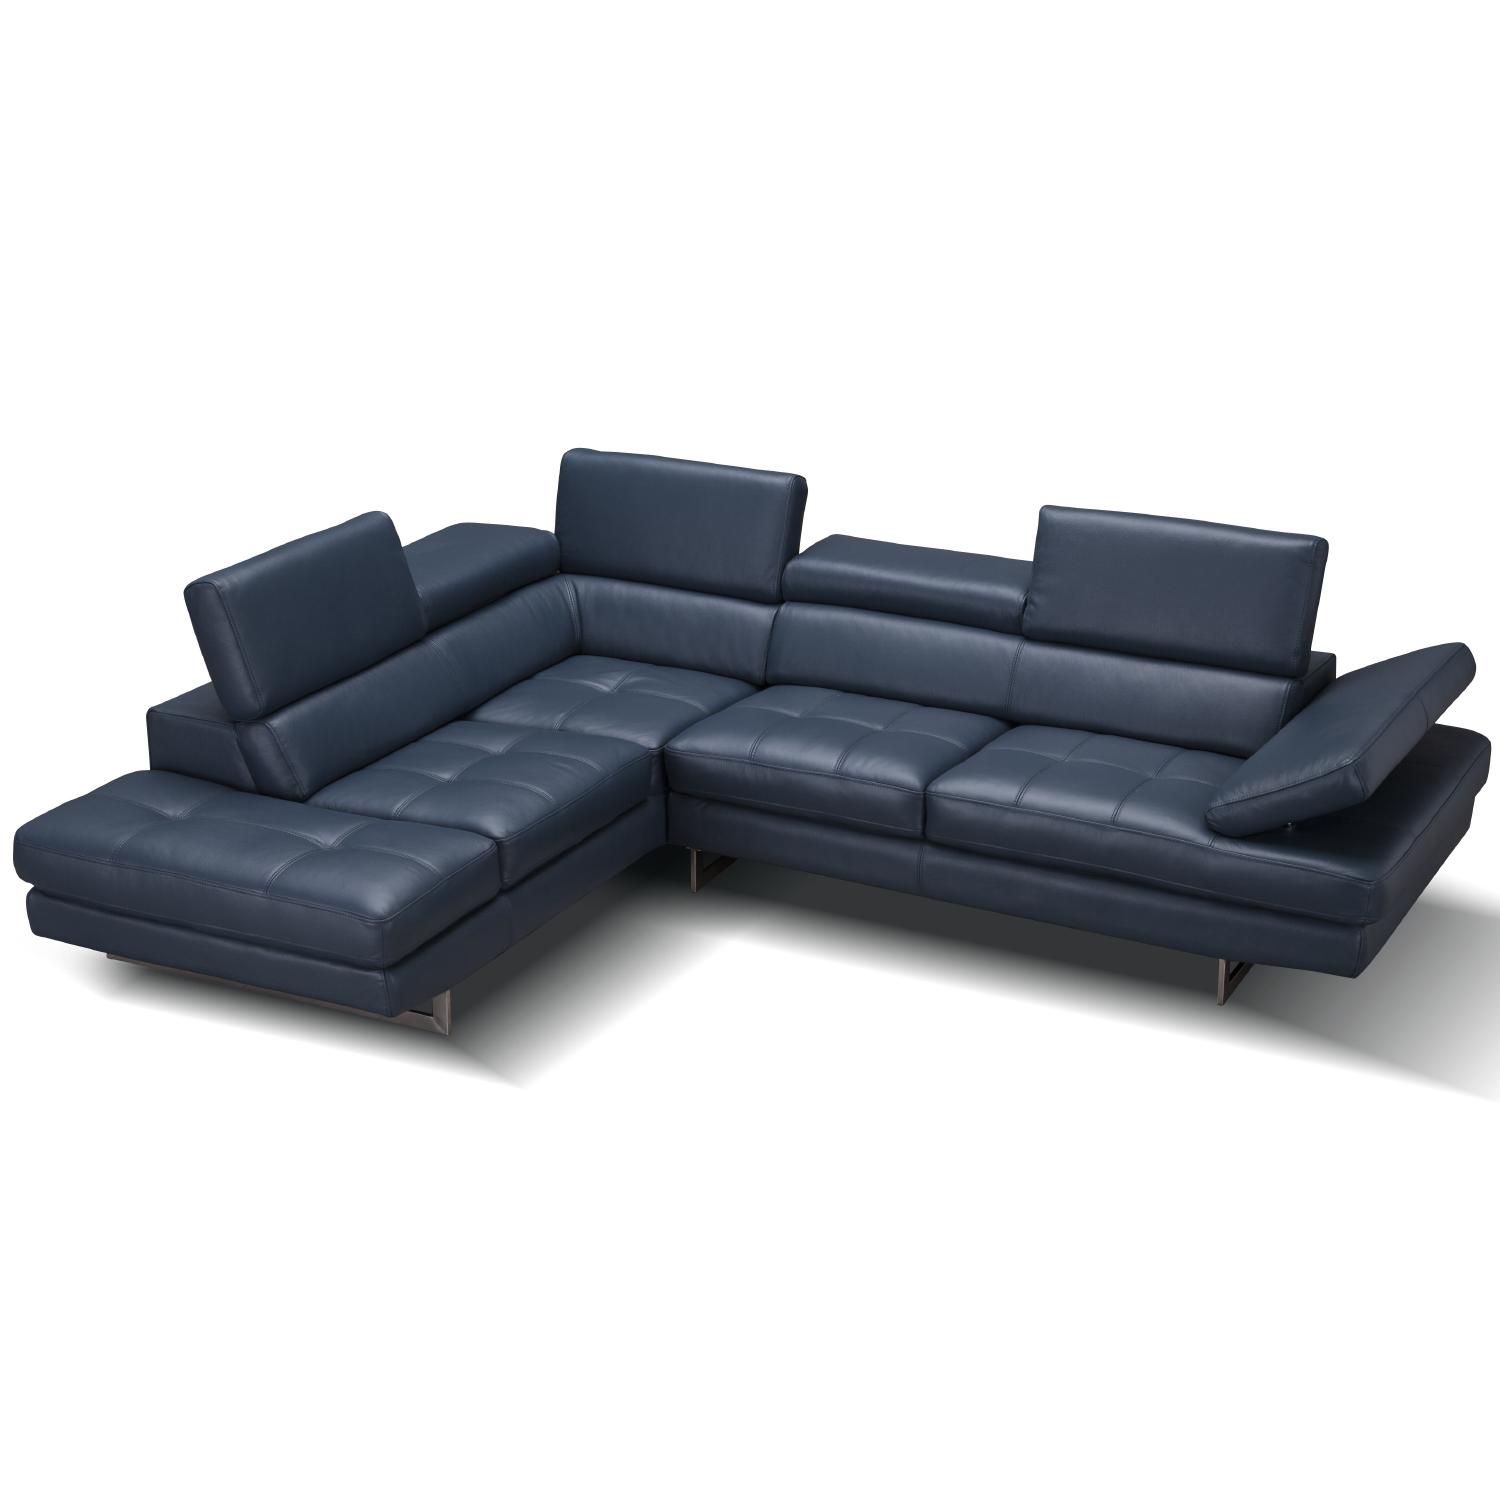 Contemporary Sectional Sofa Ashburton Ashburton Sectional BLUE in Blue Leather